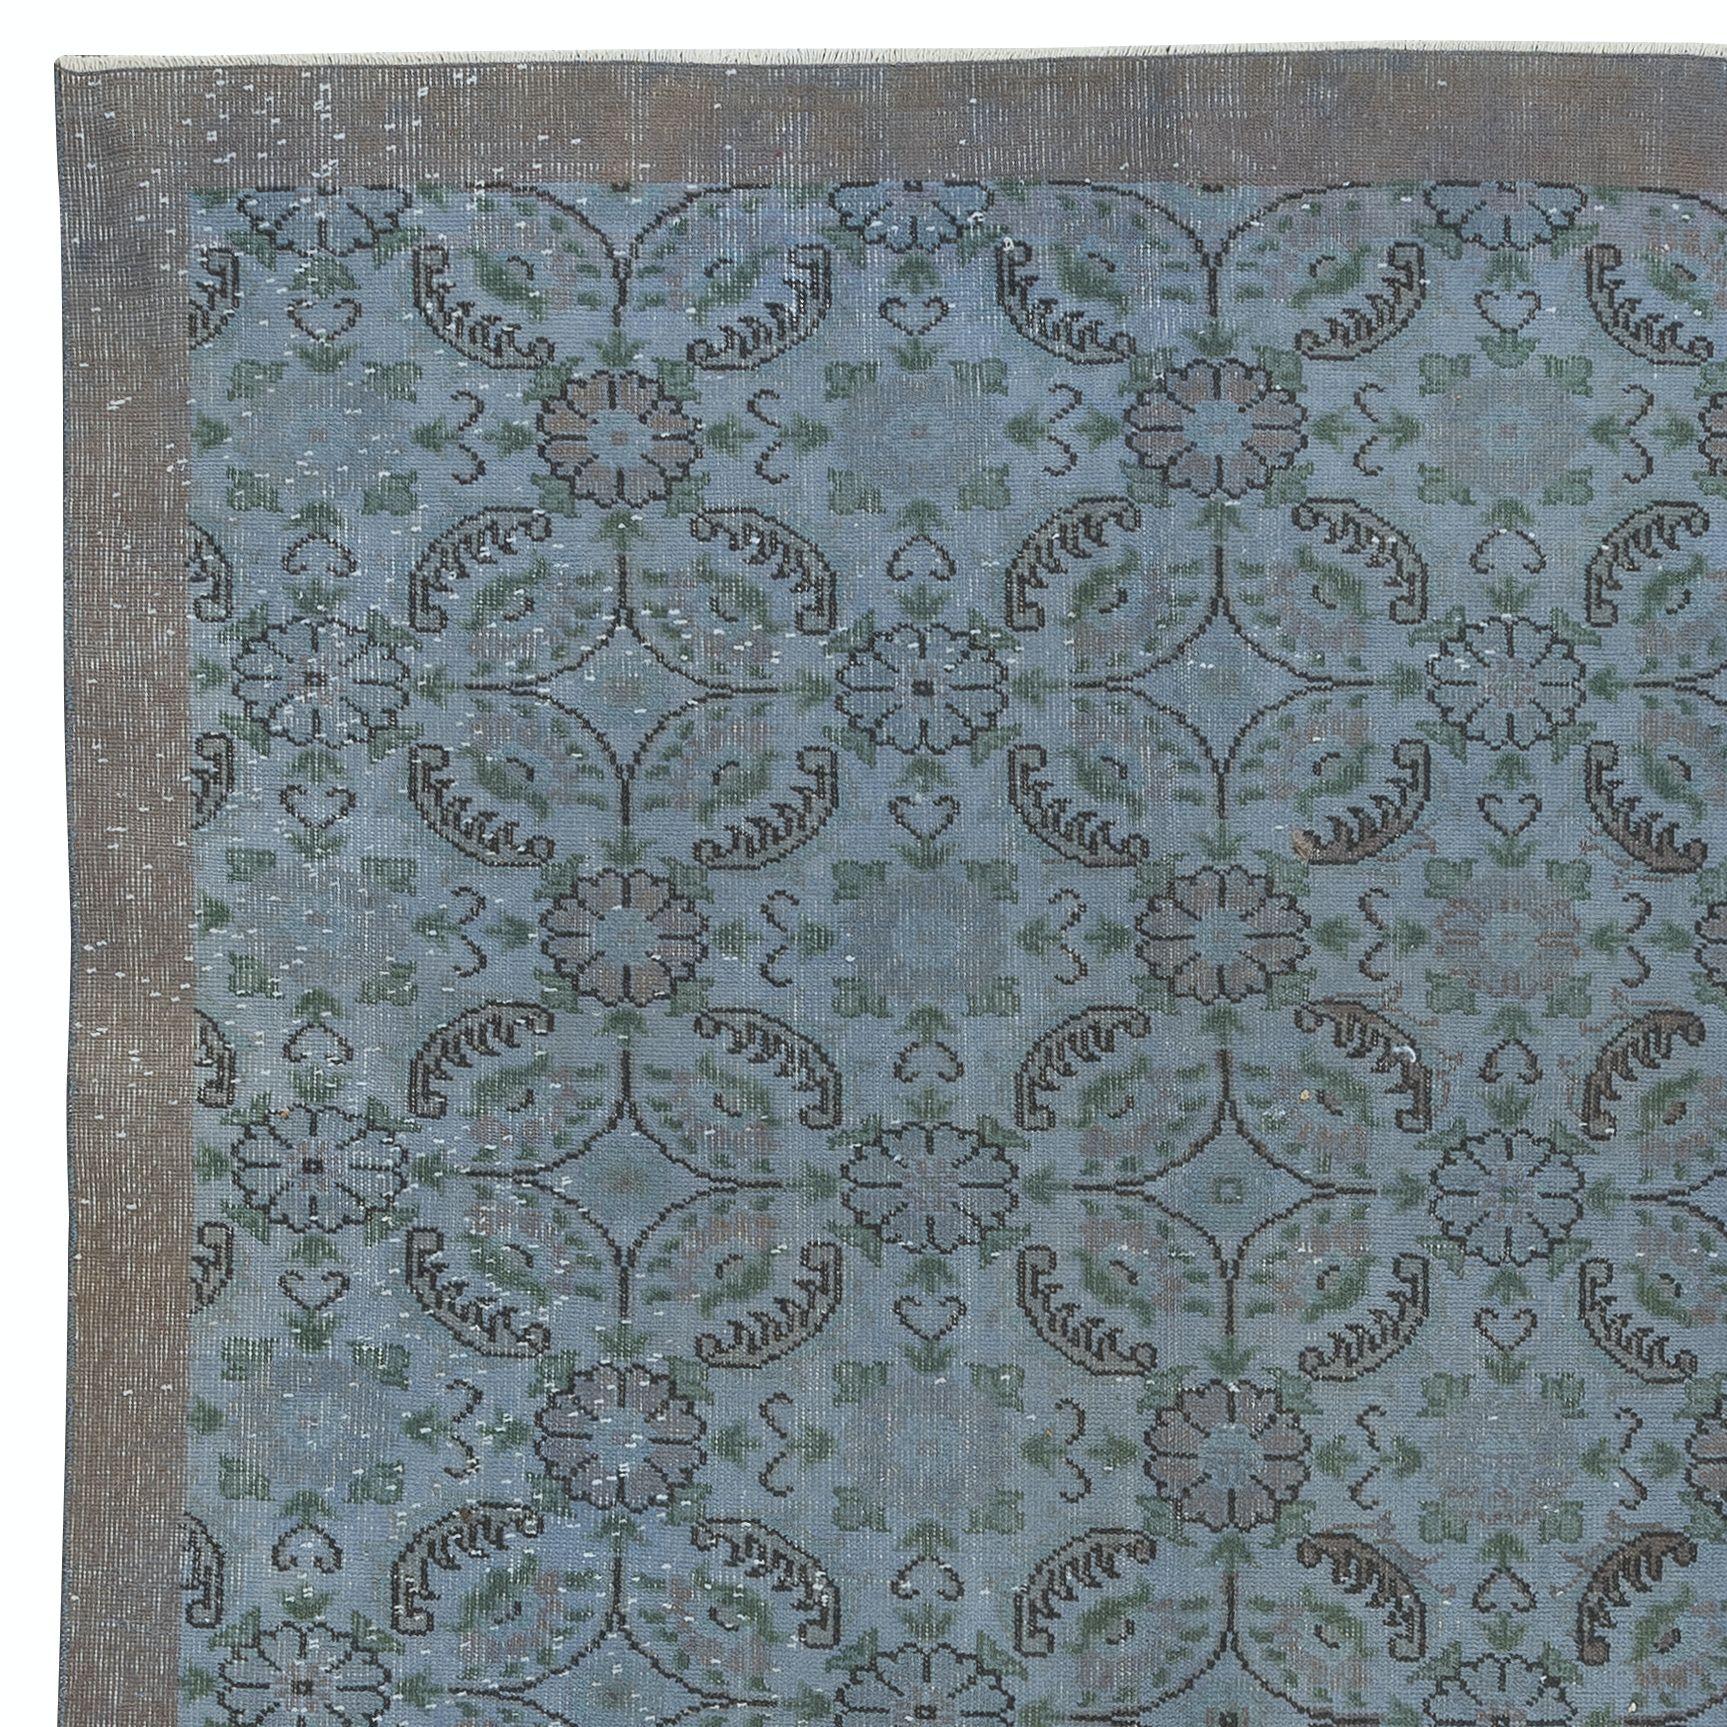 Hand-Woven 6x9.3 Ft Handmade Floral Turkish Rug with Solid Border & Light Blue Background For Sale